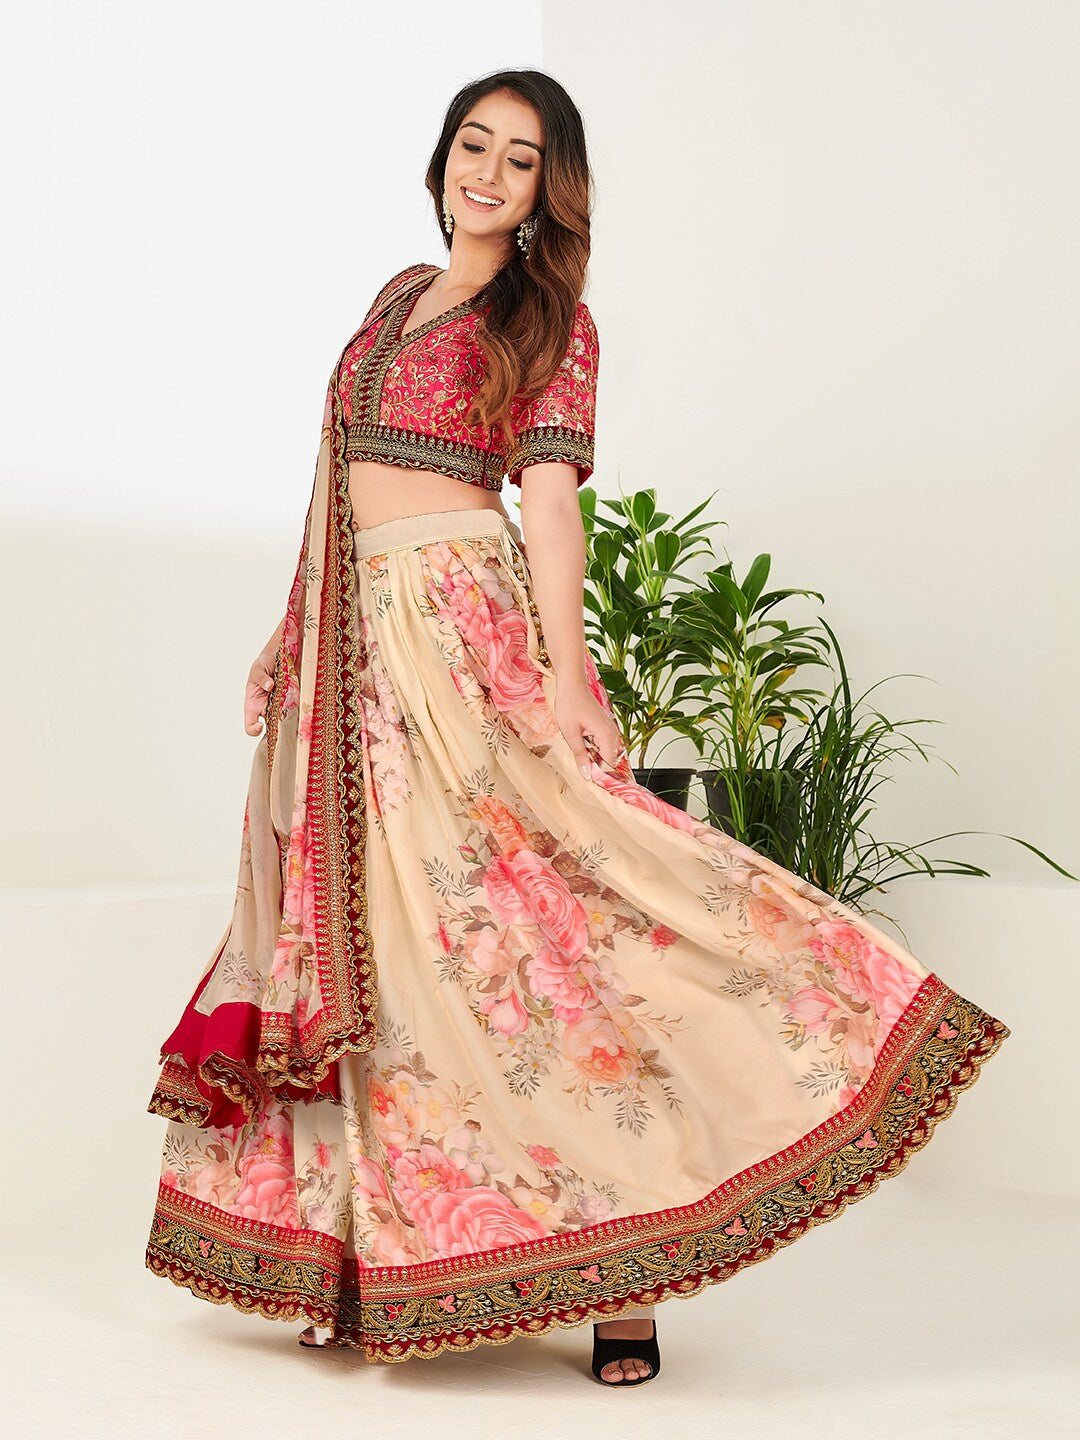 Floral Embroidered Lehenga - Indian Clothing in Denver, CO, Aurora, CO, Boulder, CO, Fort Collins, CO, Colorado Springs, CO, Parker, CO, Highlands Ranch, CO, Cherry Creek, CO, Centennial, CO, and Longmont, CO. Nationwide shipping USA - India Fashion X